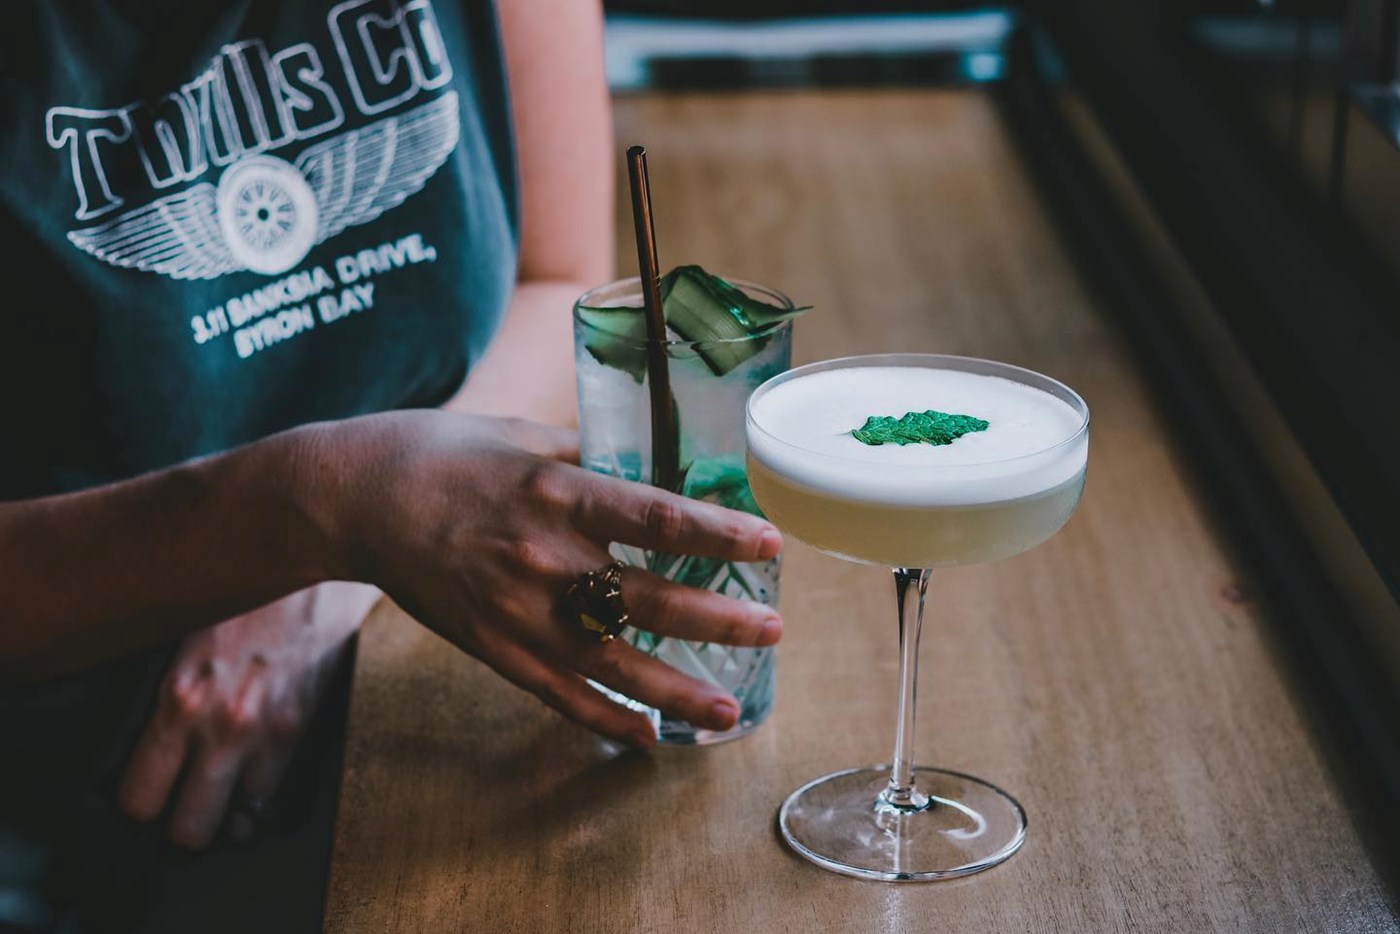 A hand reaching for one of two cocktails on a brown bar table